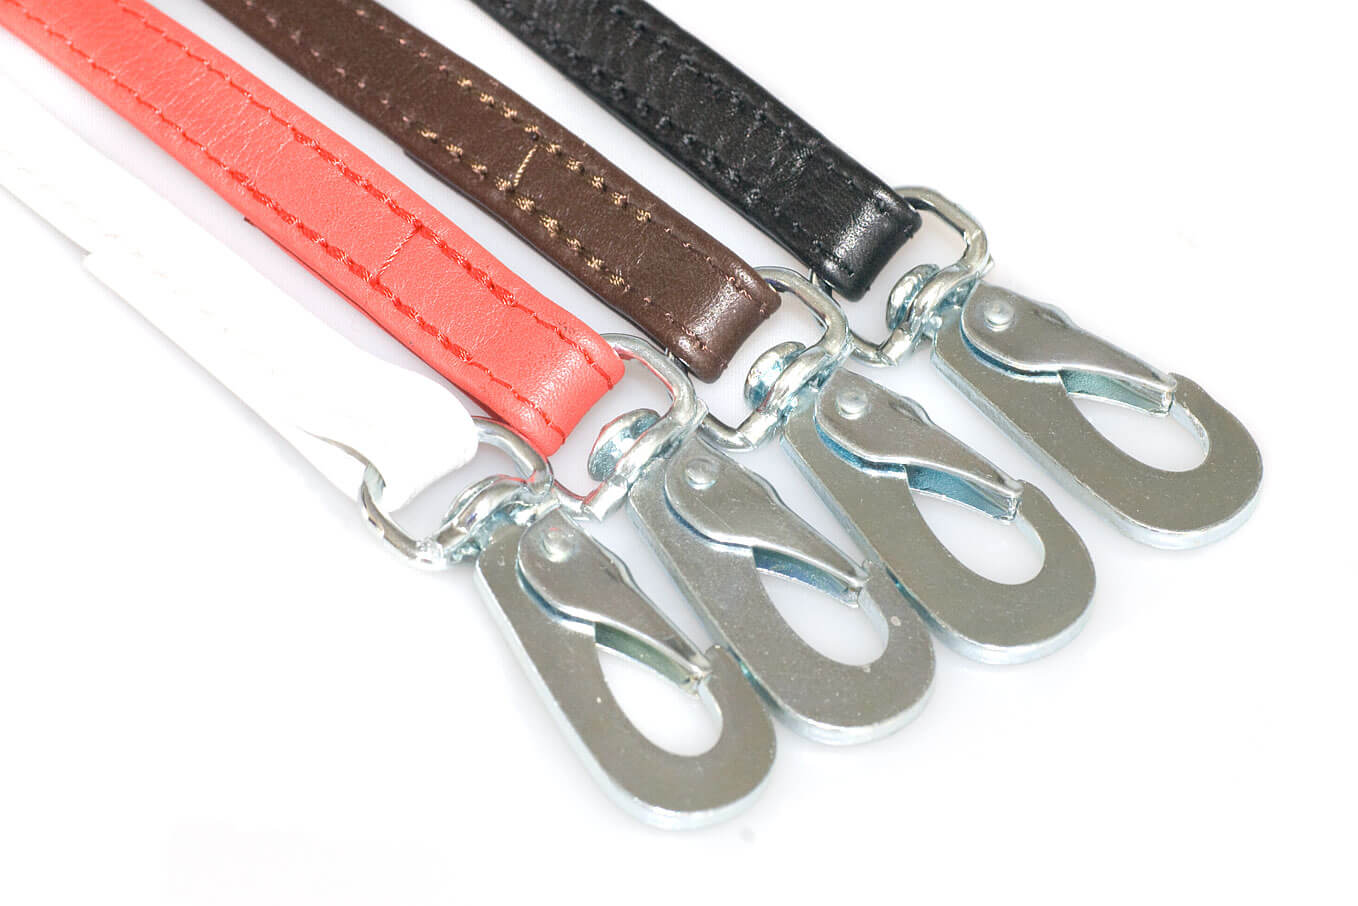 Dog show soft nappa leather leads available in white, red, brown and black